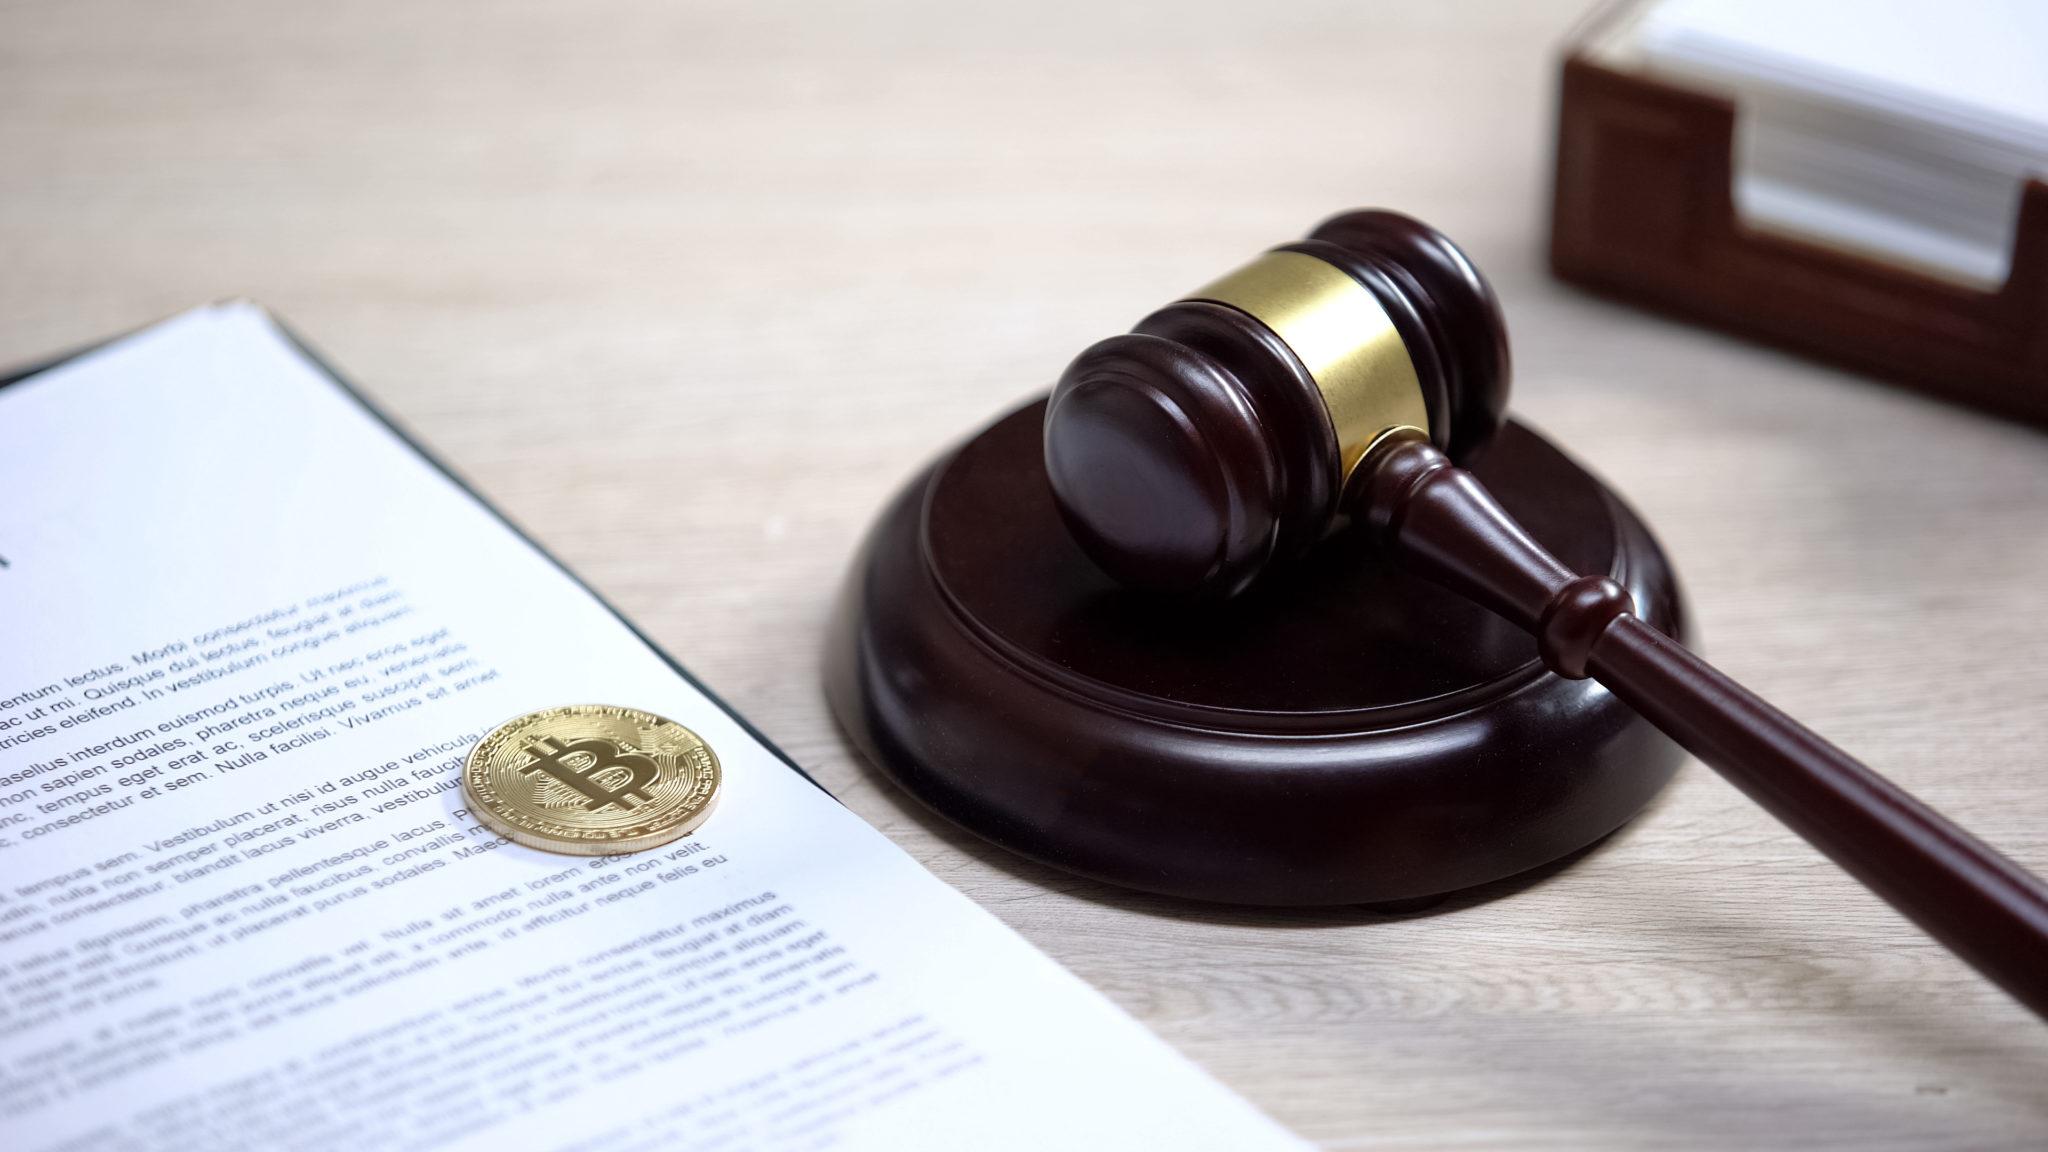 law firms specializing in blockchain cryptocurrency regulation